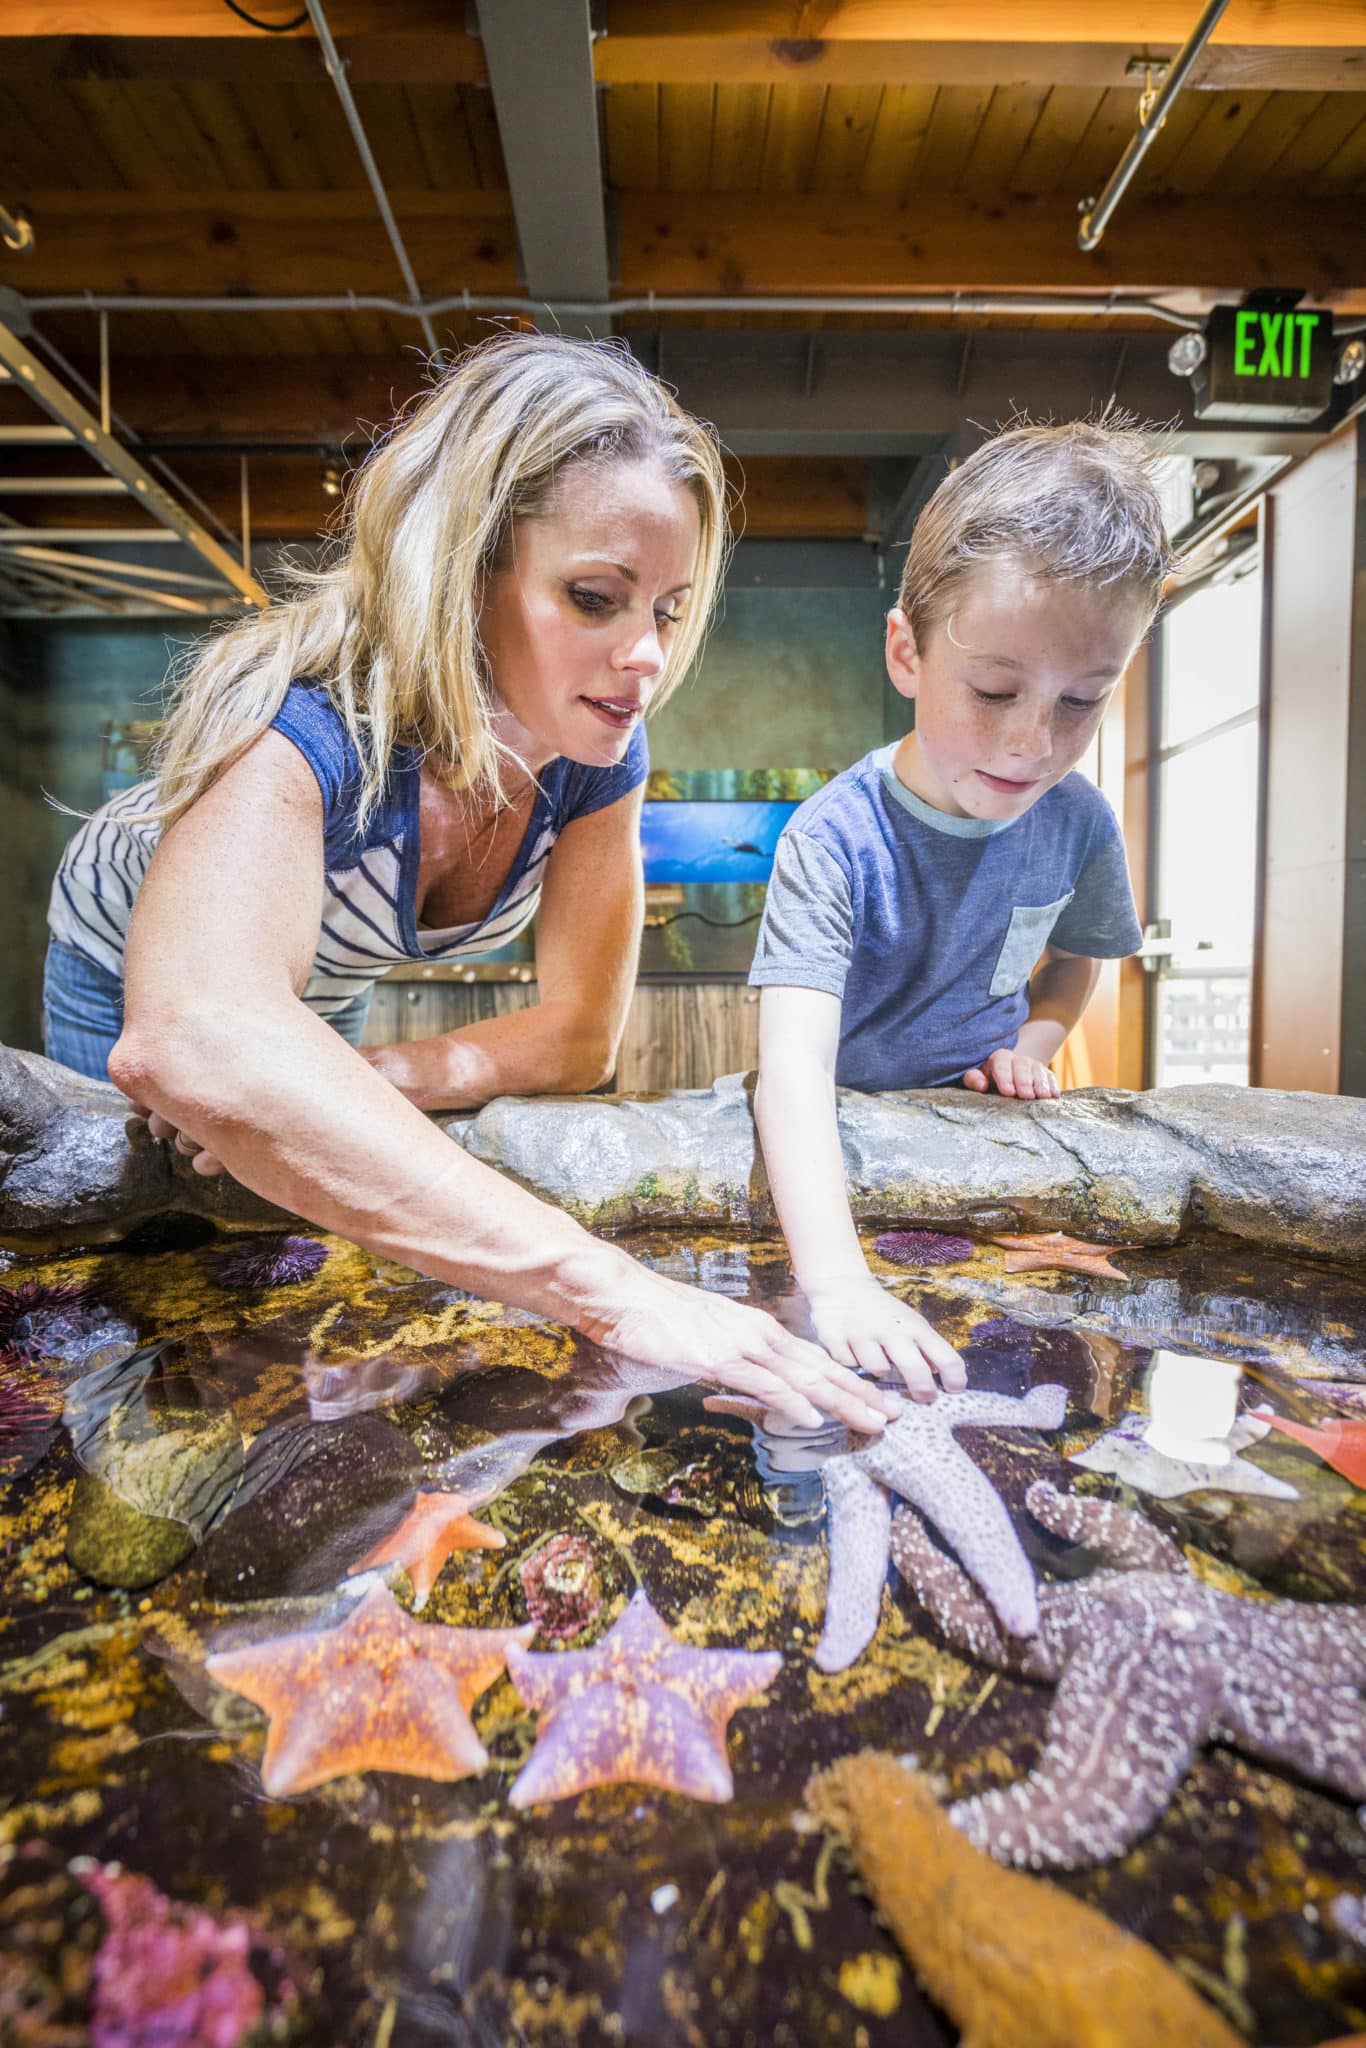 Mother and son reaching into an indoor water exhibit touching starfish